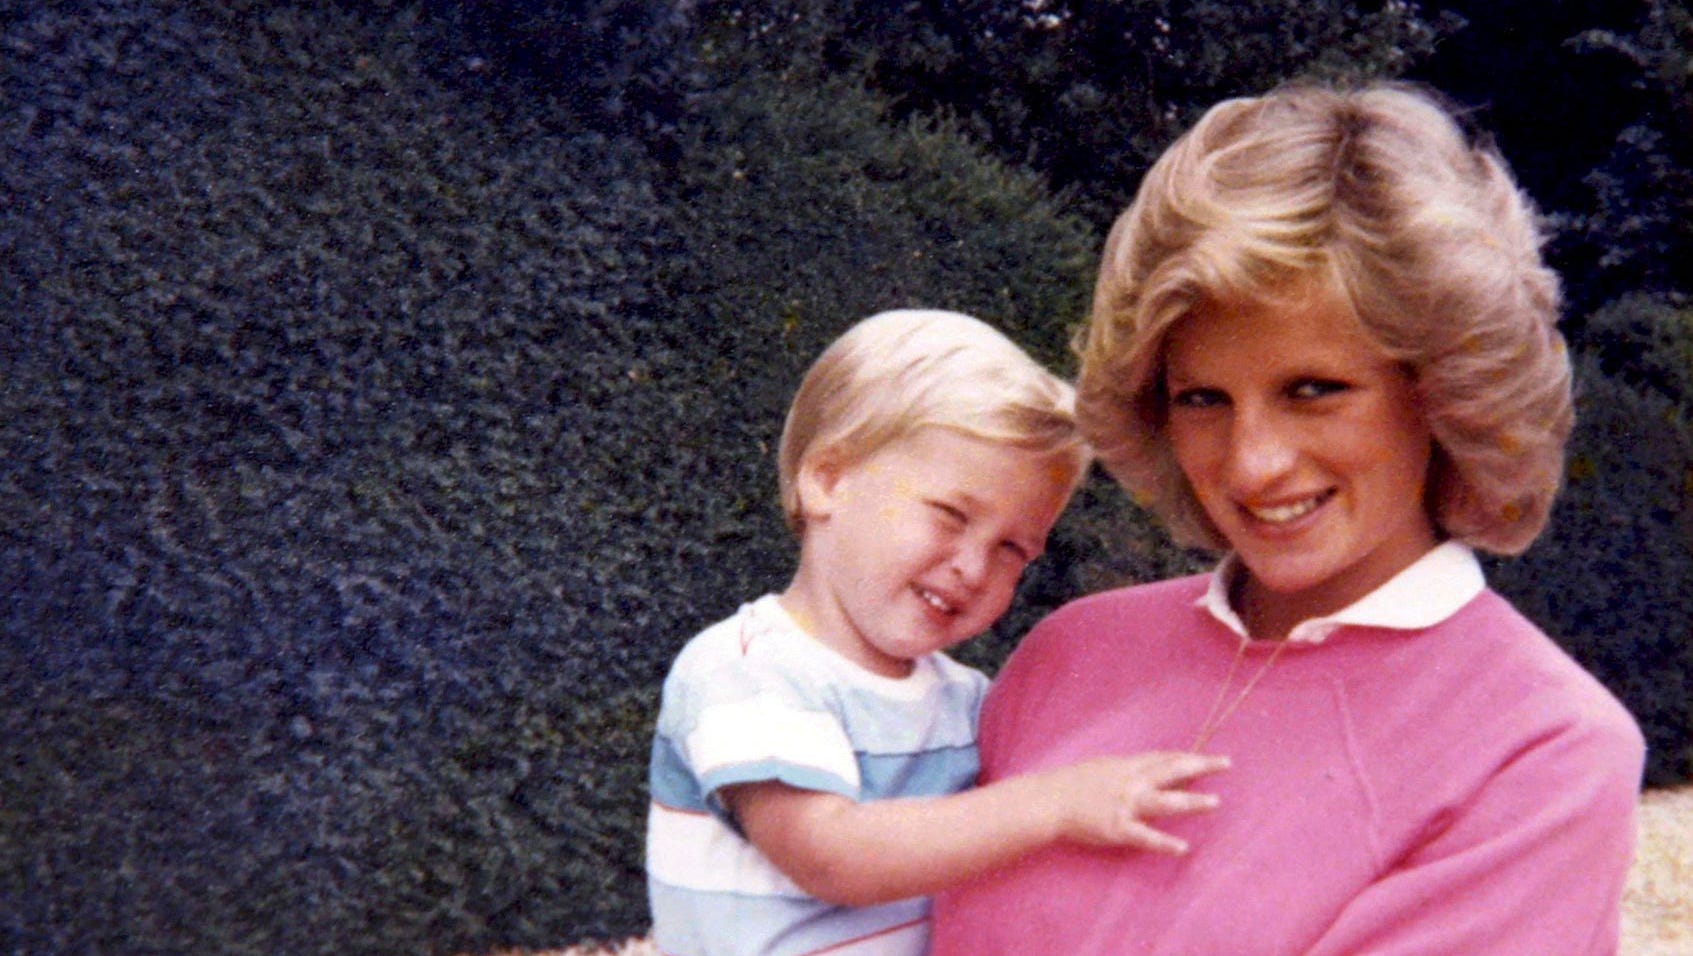 Prince William issues rare statement addressing BBC's investigation of Princess Diana interview - USA TODAY